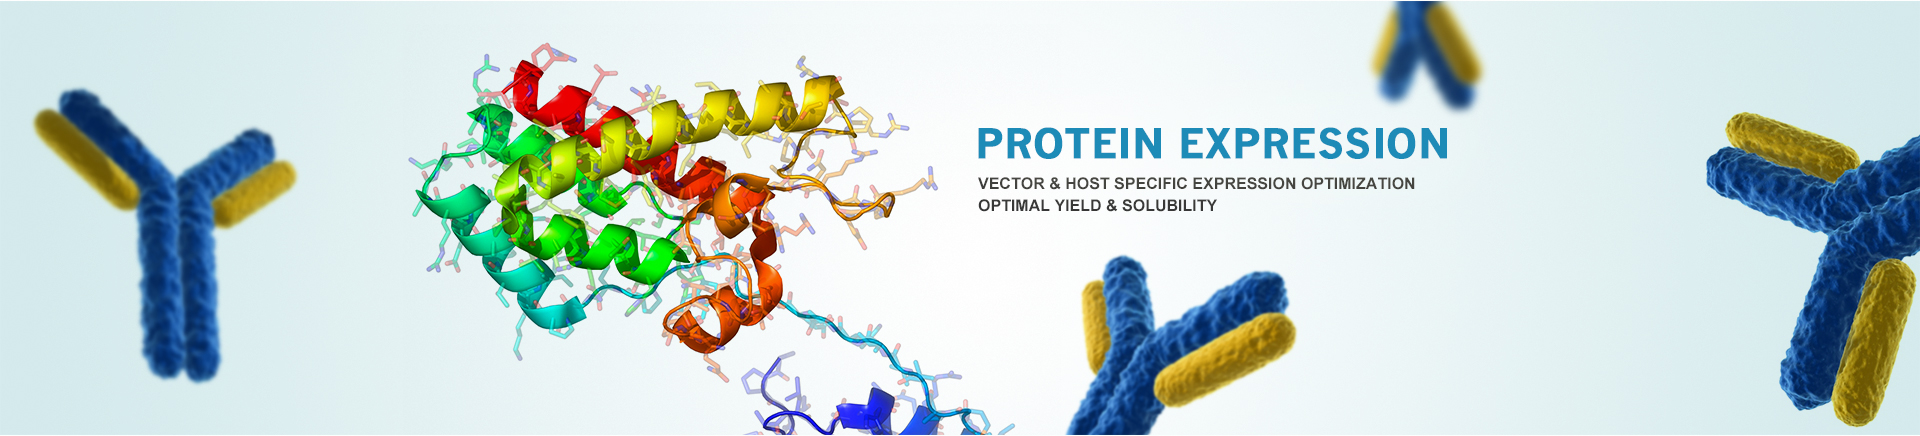 protein expression